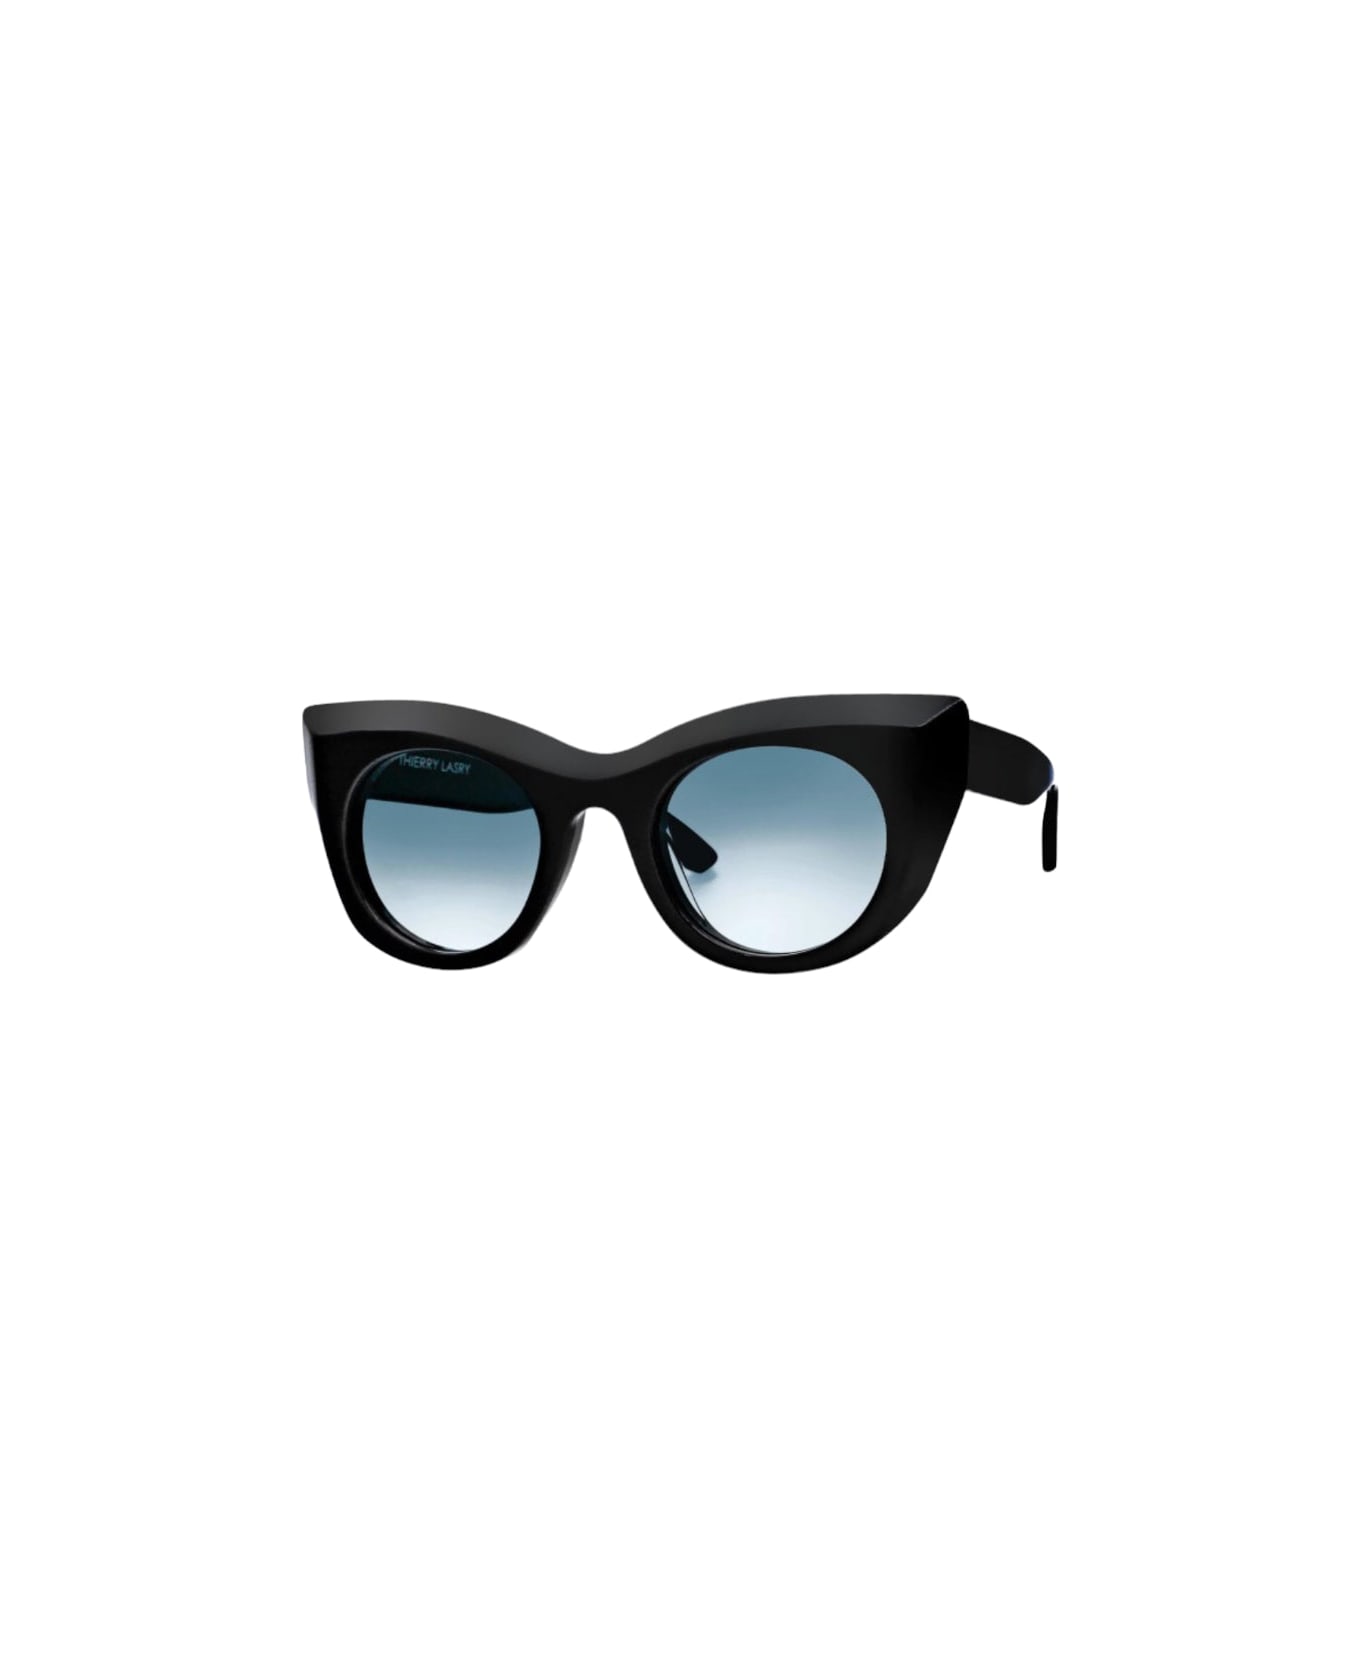 Thierry Lasry Climaxxxy - Black Sunglasses サングラス